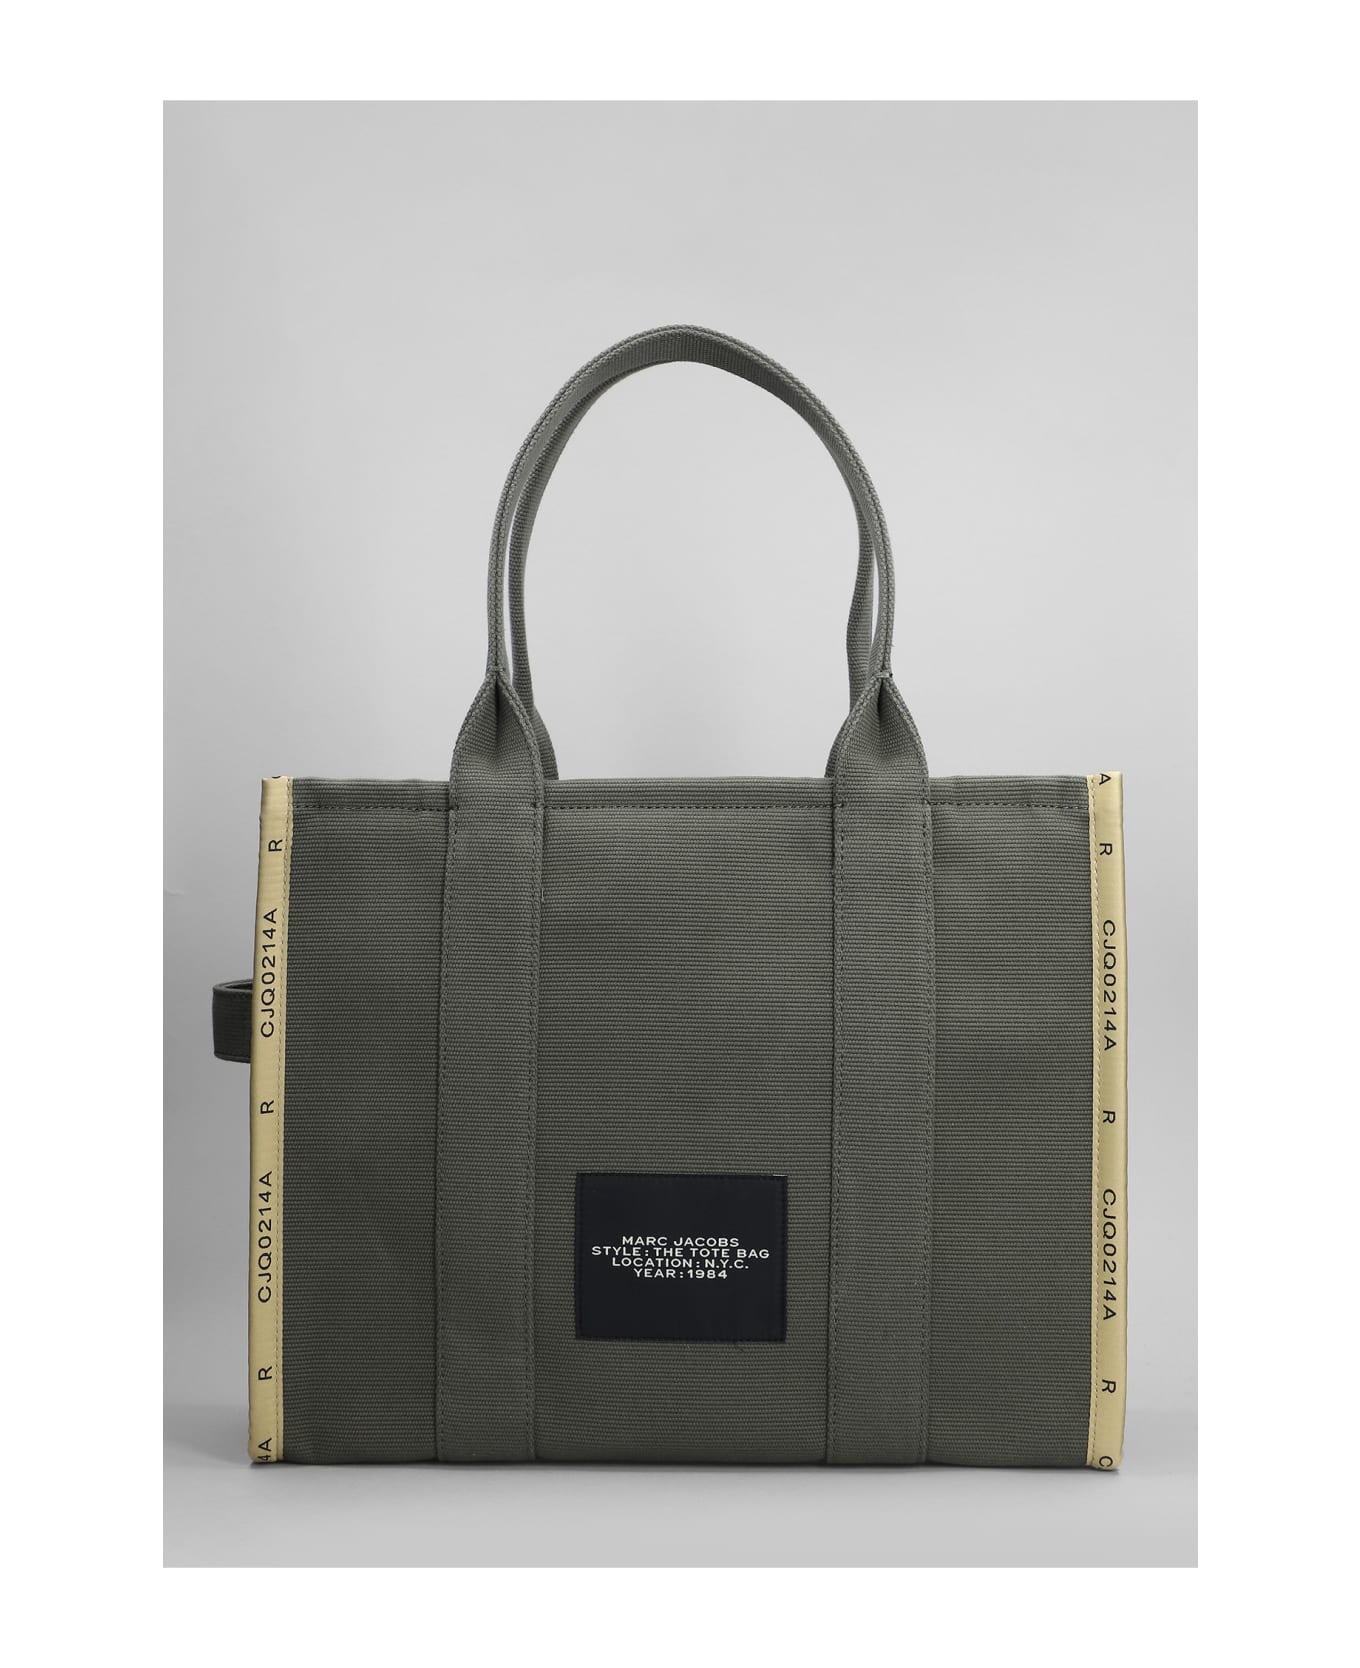 Marc Jacobs The Large Tote Bag - green トートバッグ